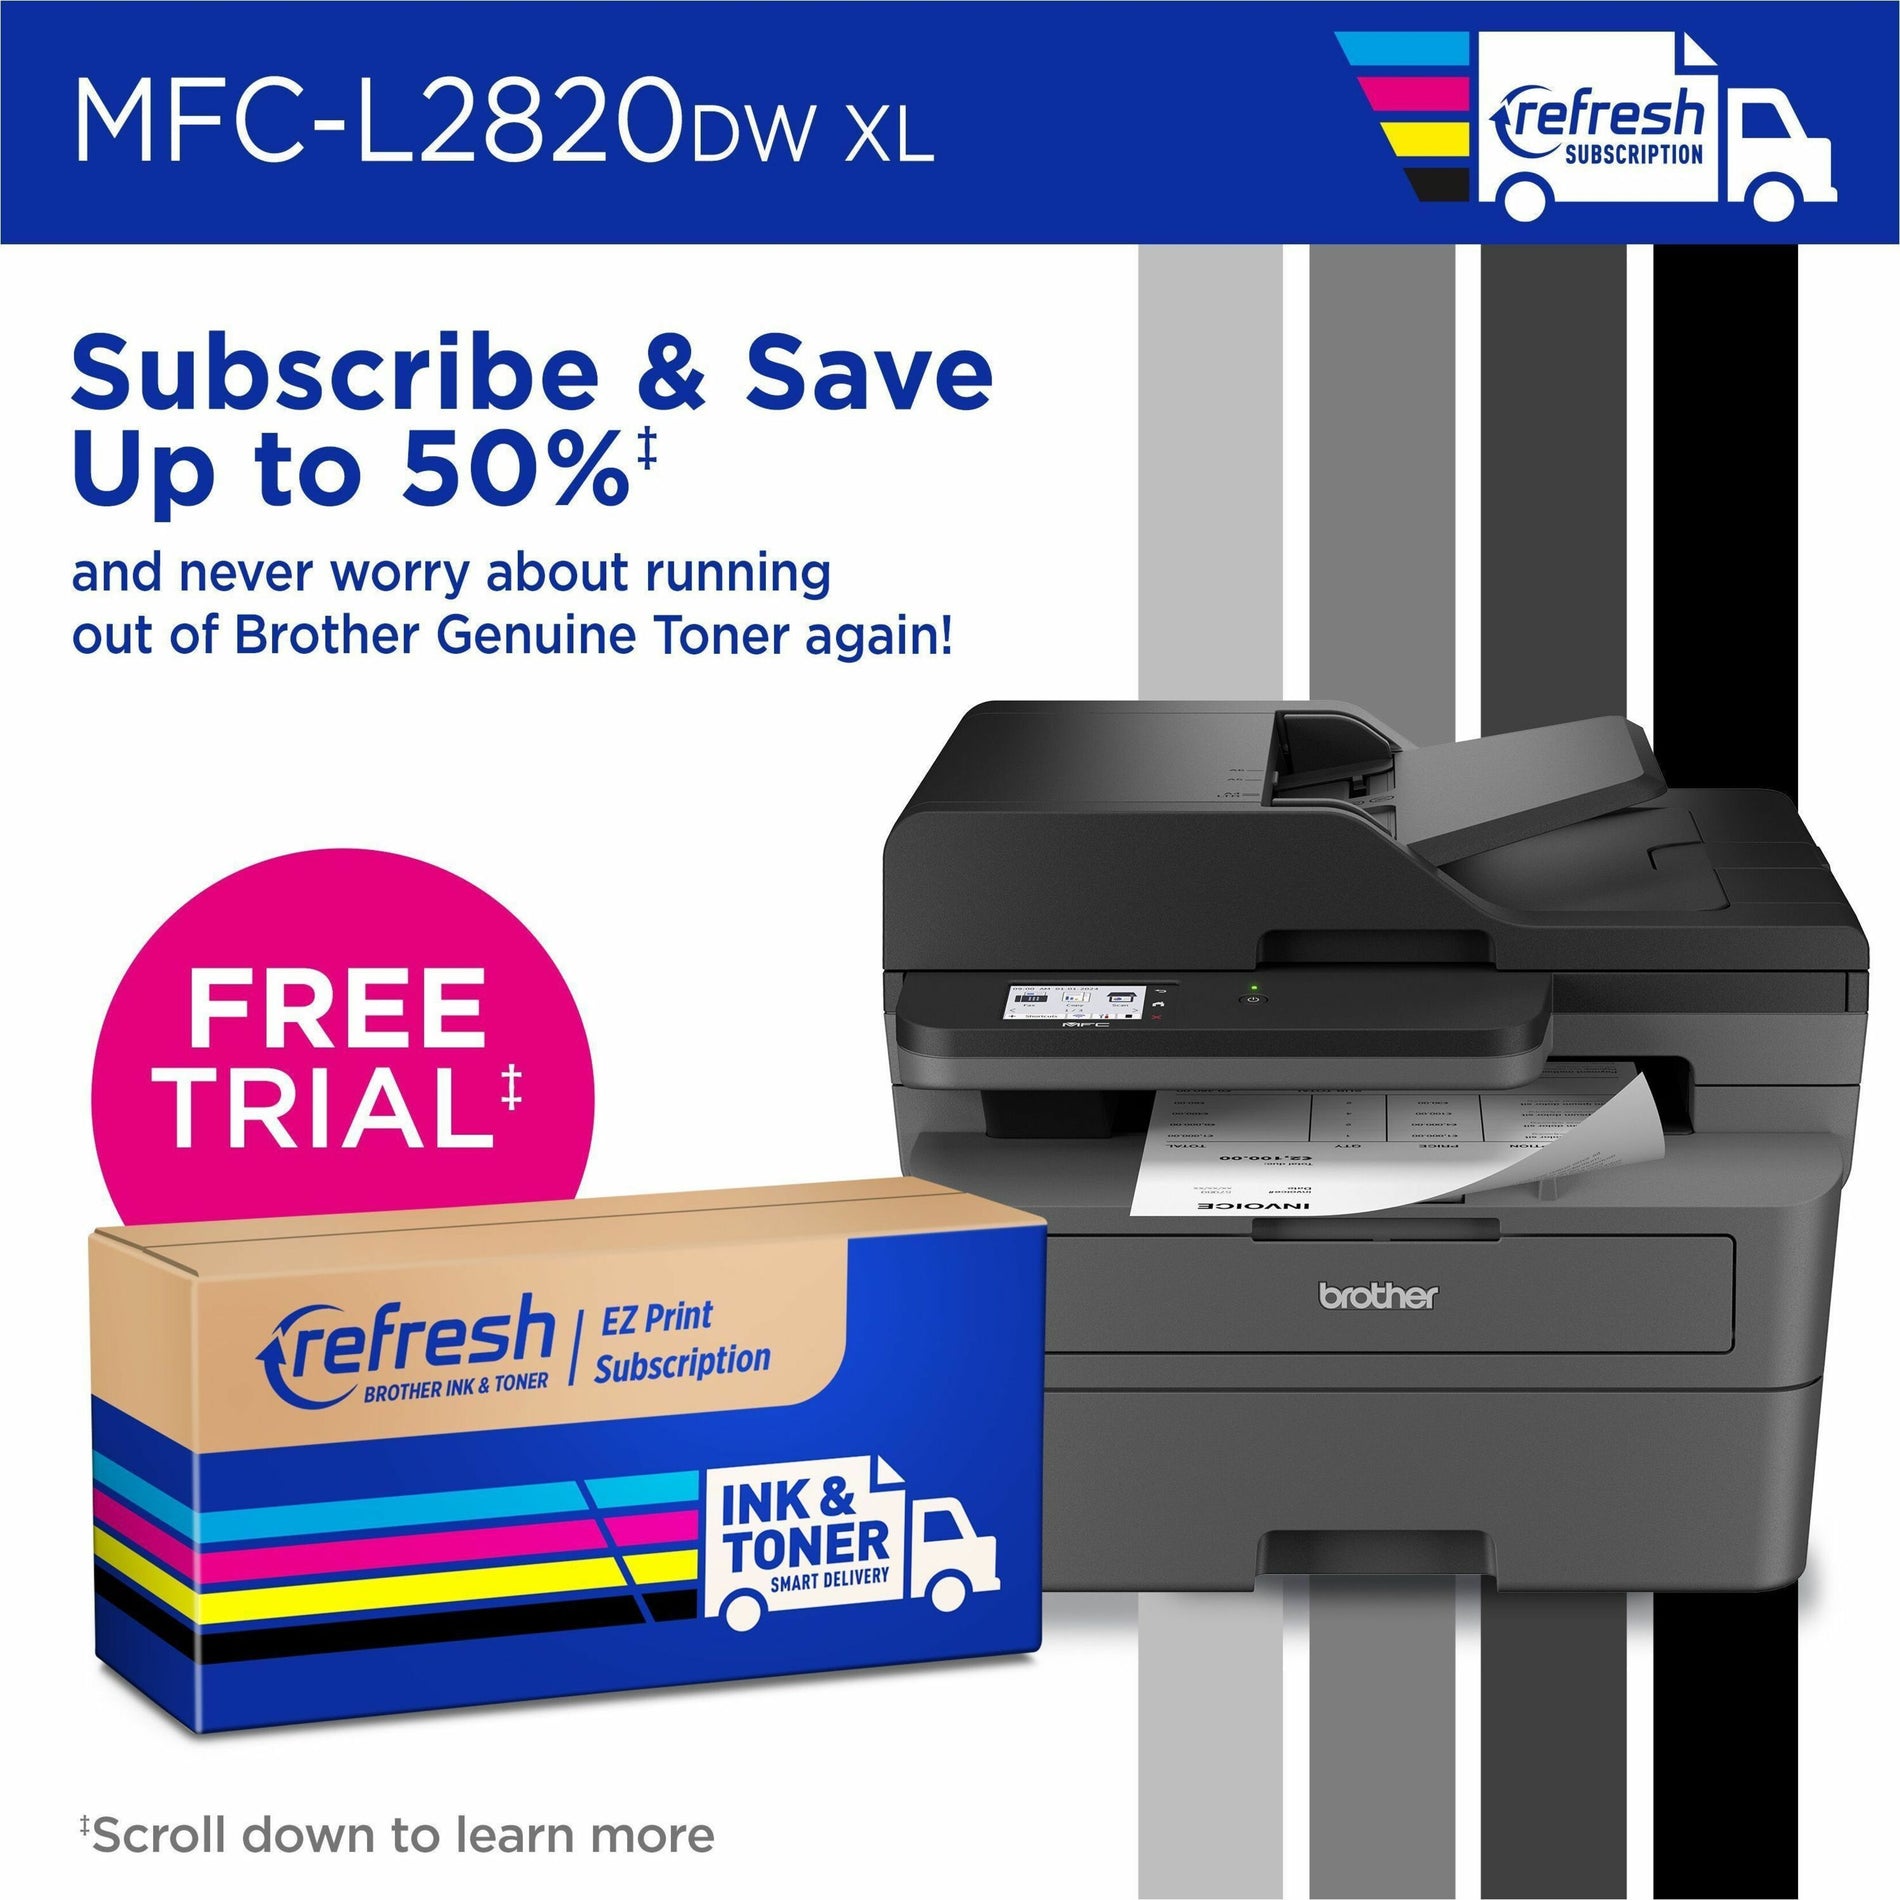 Brother MFCL2820DWXL Wireless MFC-L2820DW XL Compact Monochrome All-in-One Laser Printer, Automatic Duplex Printing